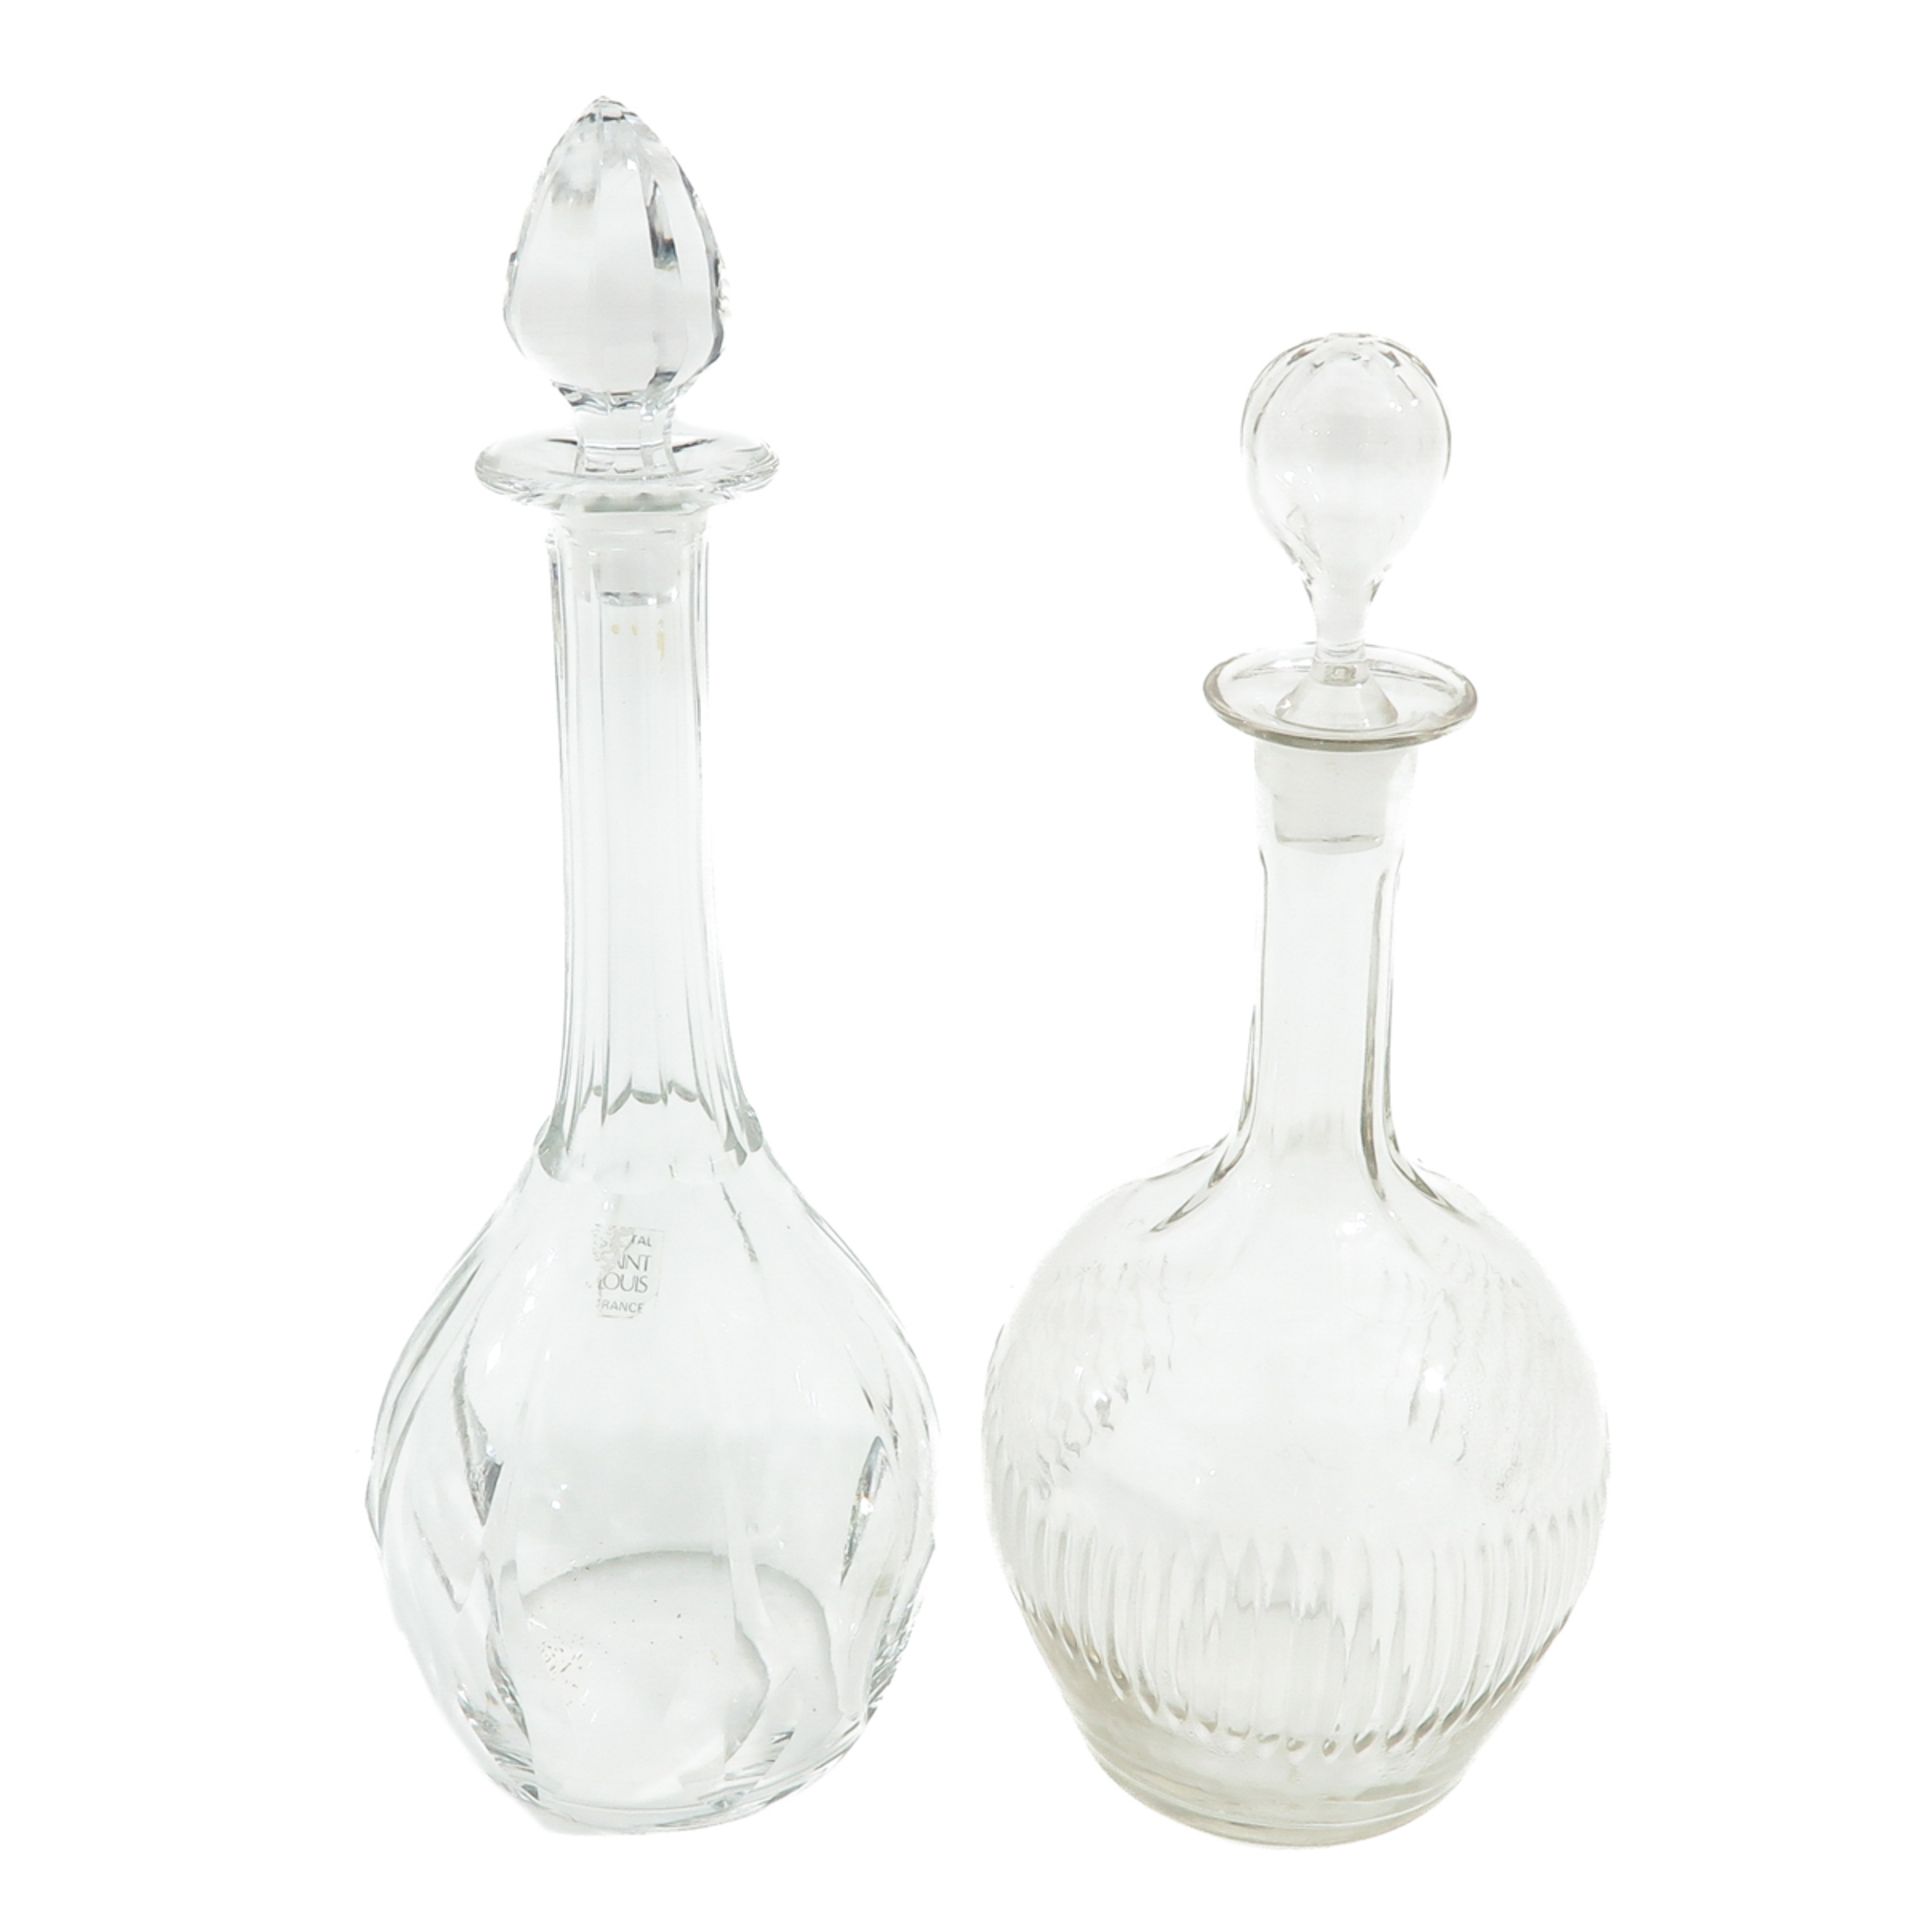 A Collection of Decanters - Image 10 of 10